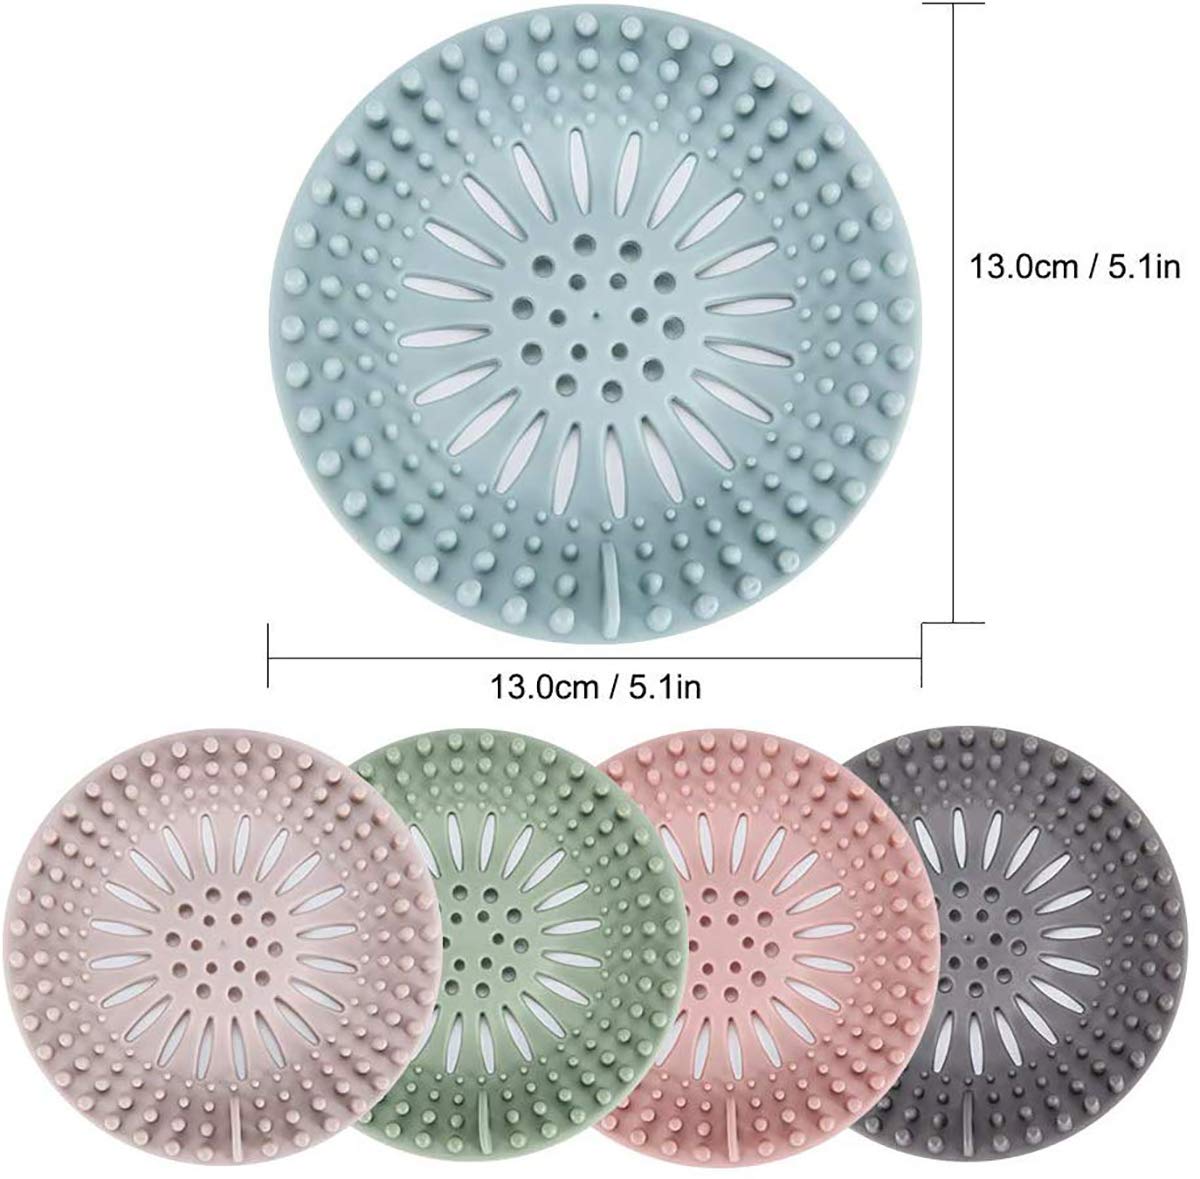 Emoly Silicone Hair Catcher Shower Drain Covers, Easy to Install and Clean Suit，Universal Rubber Sink Strainerfor Bathroom Bathtub and Kitchen (5 Pack)